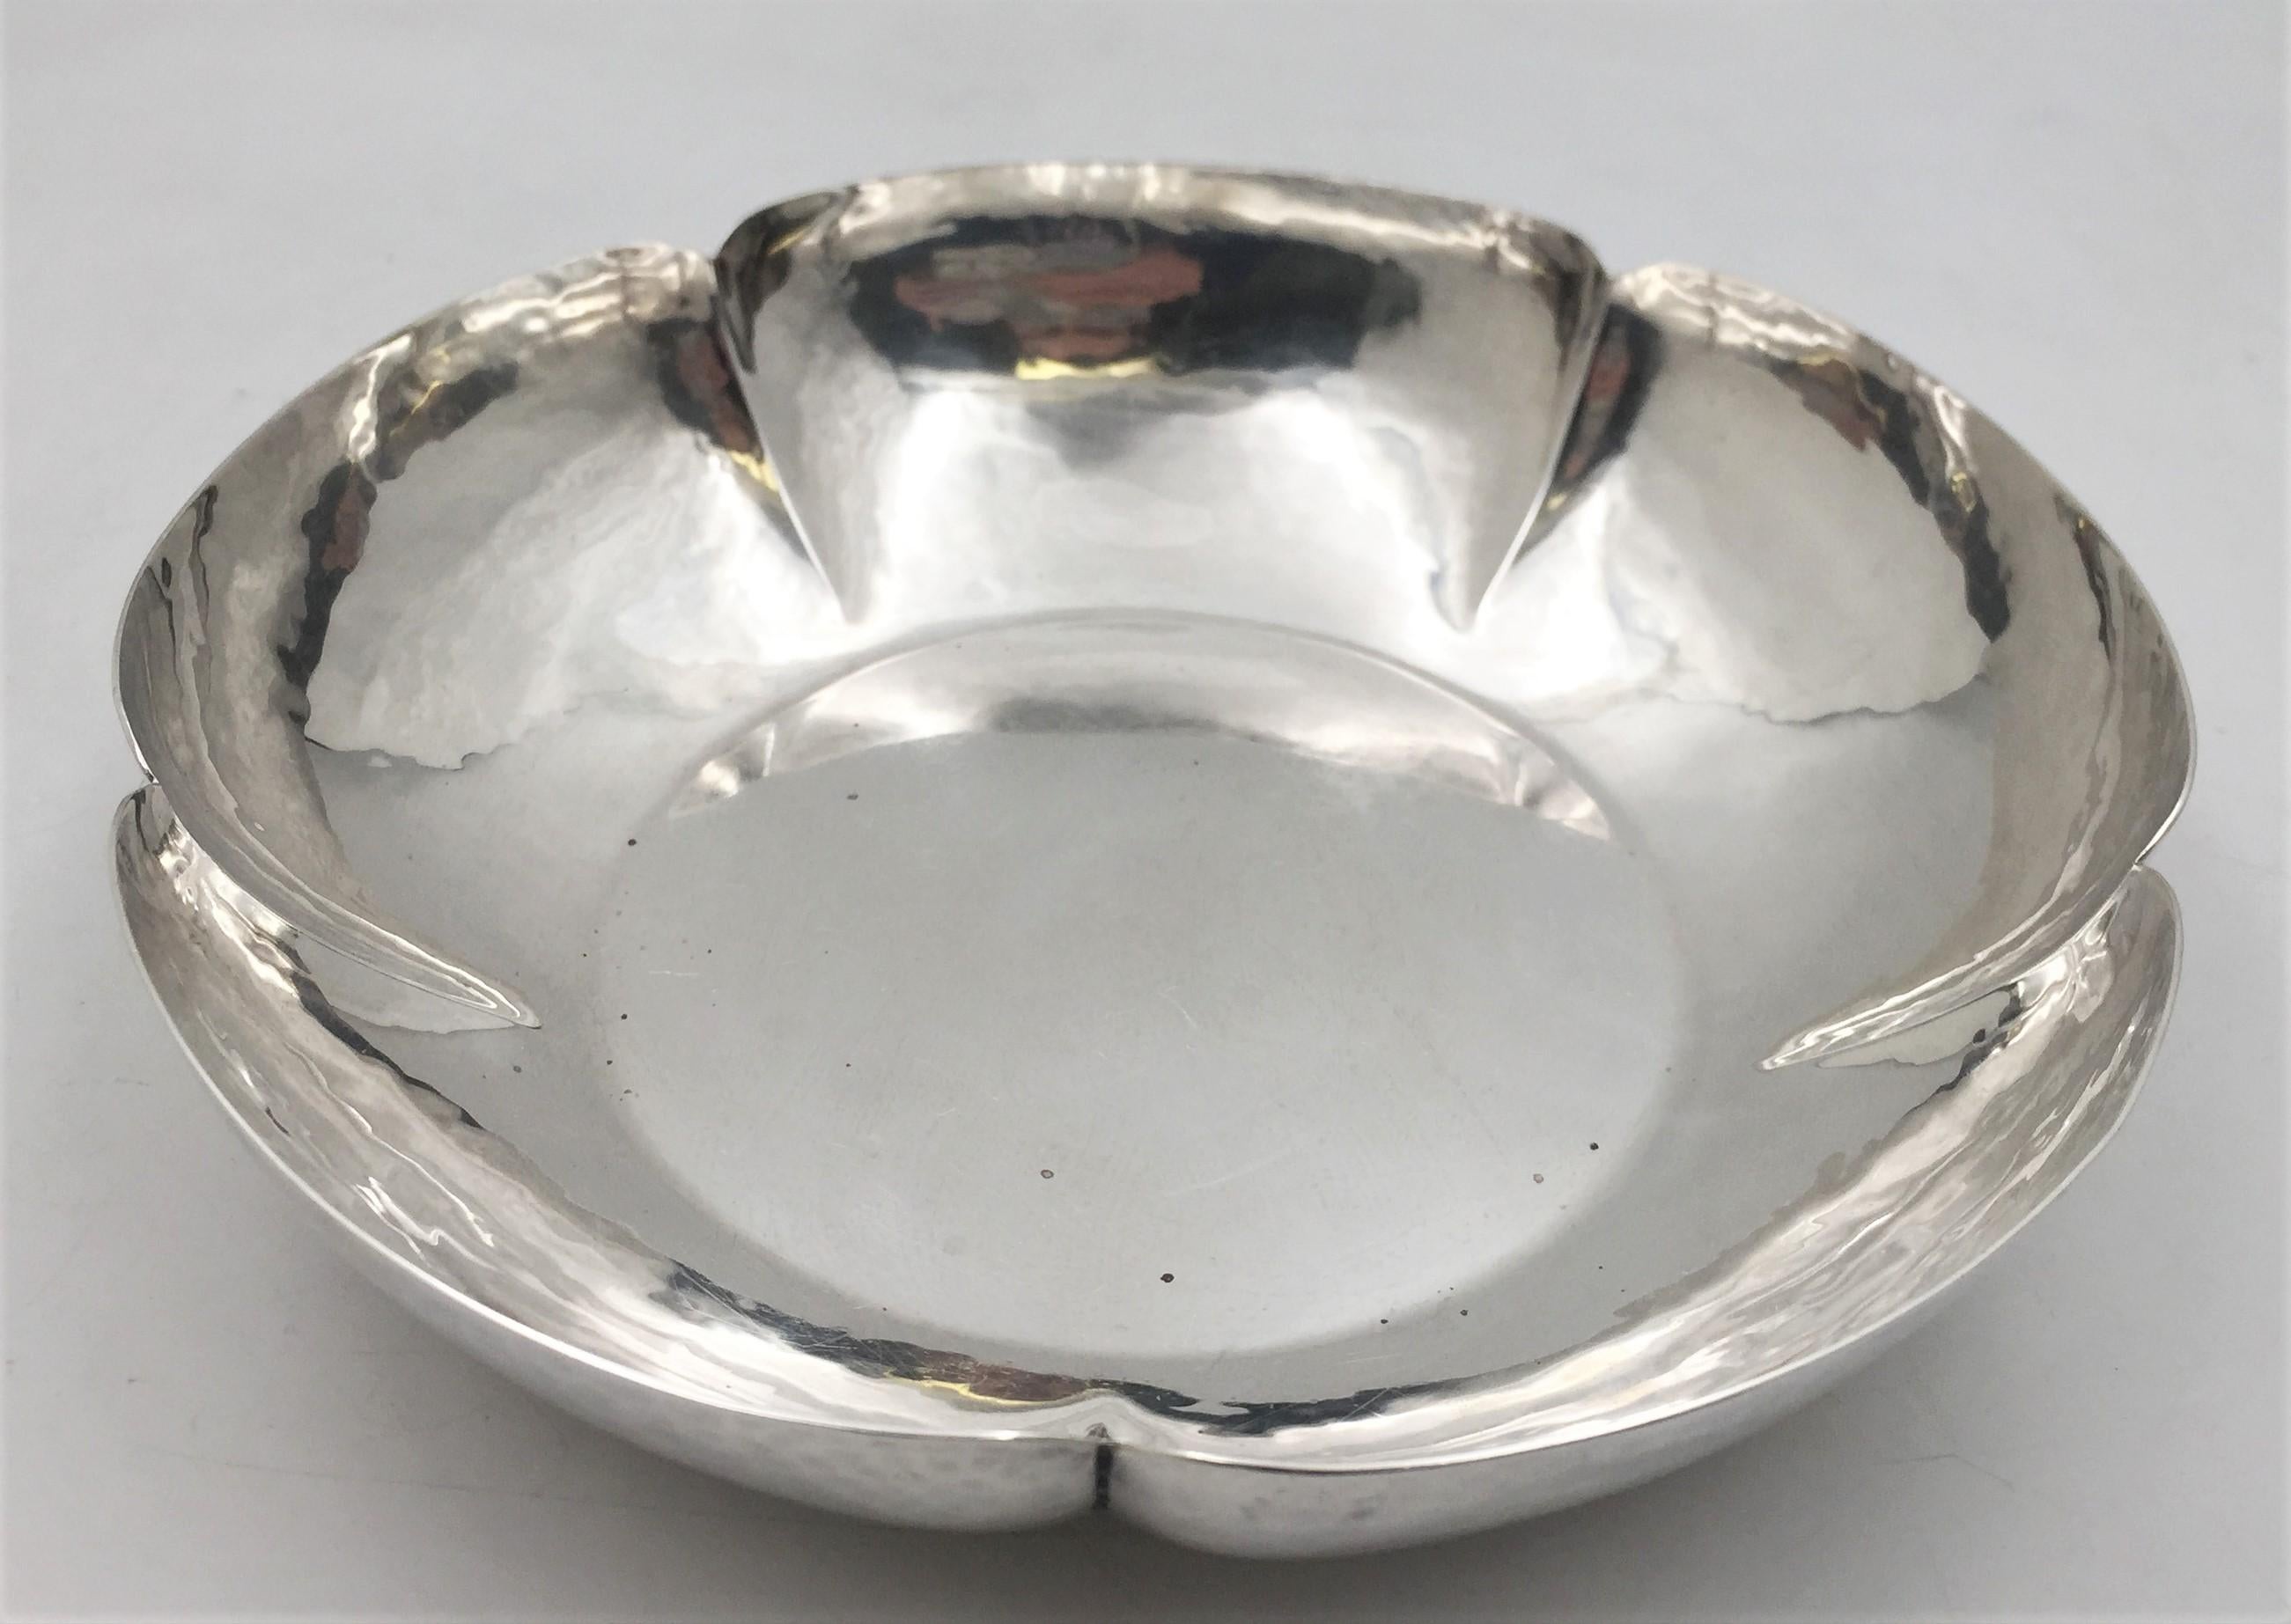 Cellini sterling silver, hand-hammered bowl in Mid-Century Modern style, with a beautiful geometric, multi-lobed design. It measures 9'' in diameter by 2'' in height, weighs 16.9 troy ounces, and bears hallmarks as shown.

Cellini Craft, Ltd., was a